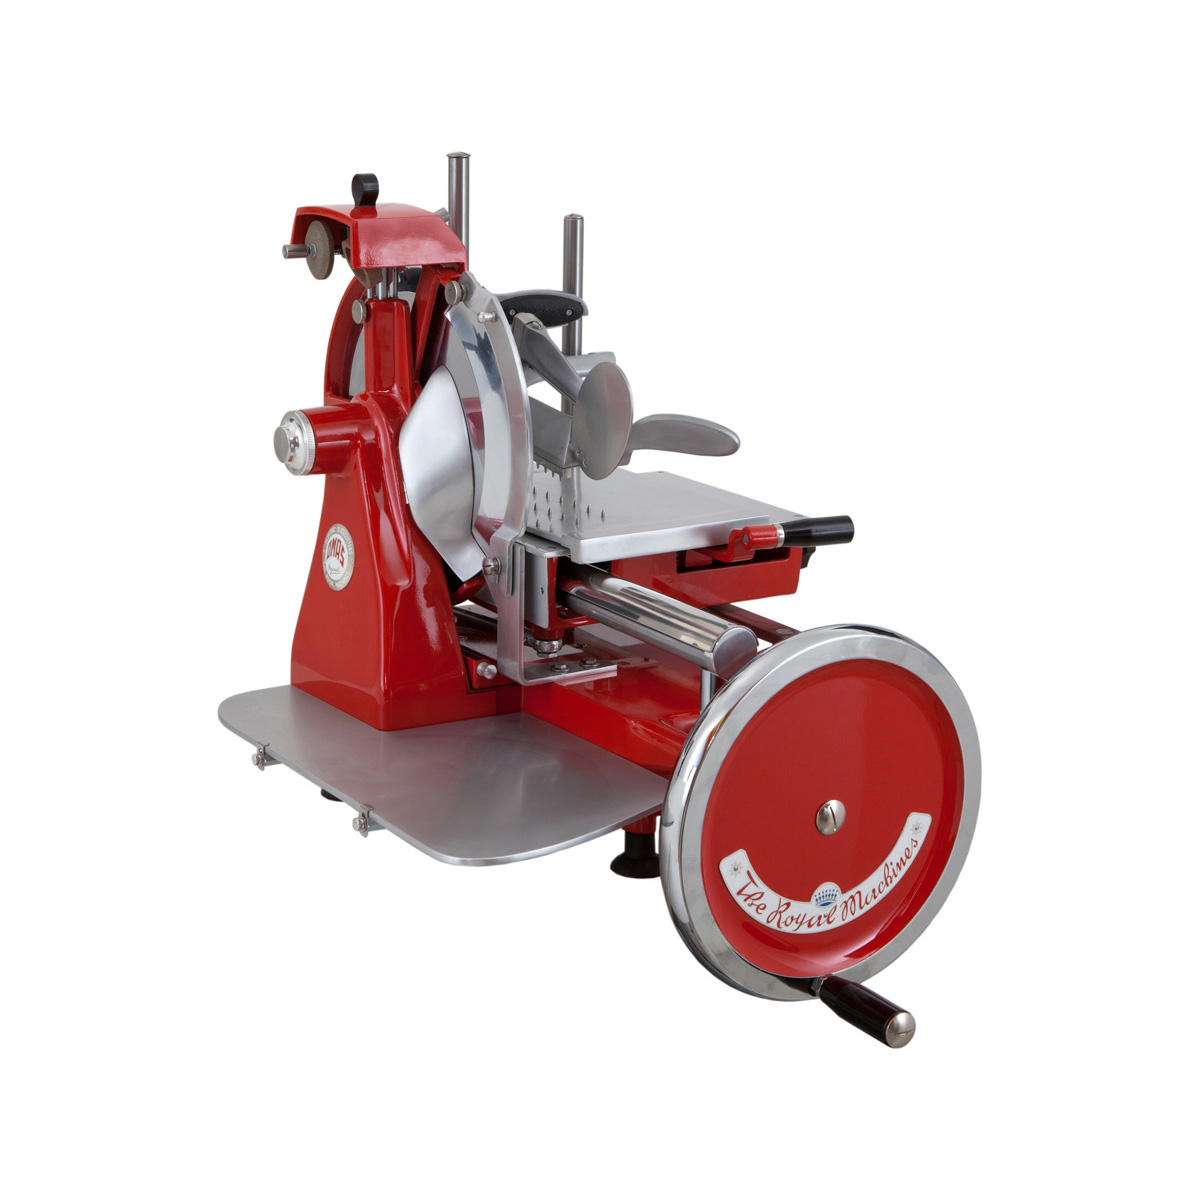 Axis AX-VOL12 Manual Meat Slicer with 12″ Blade, Built-In Sharpener